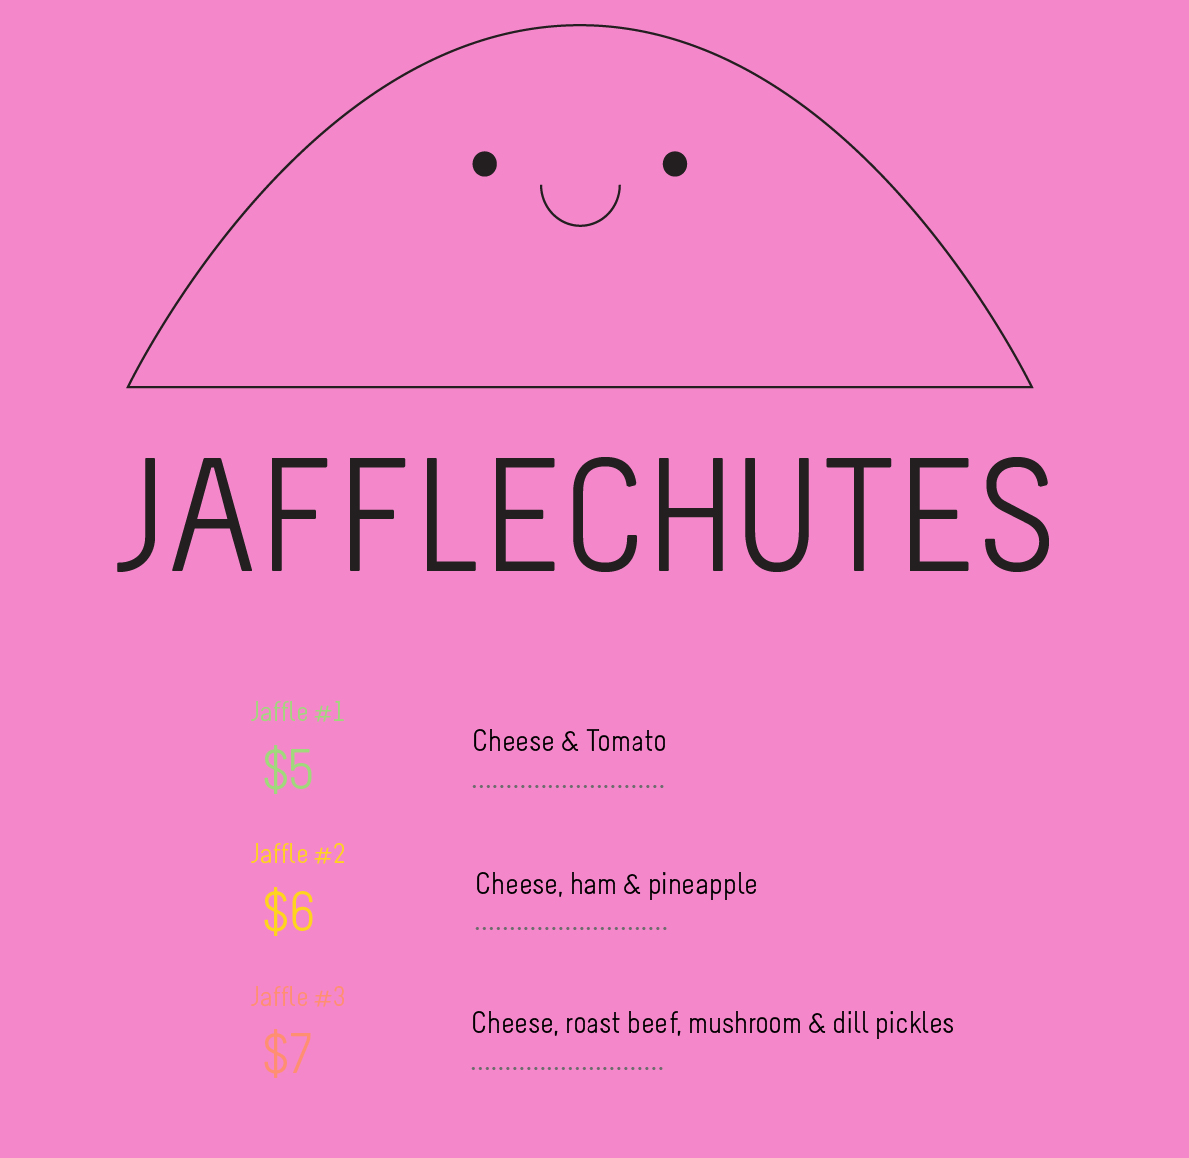  Jafflechutes float-down restaurant Melbourne and New York City 